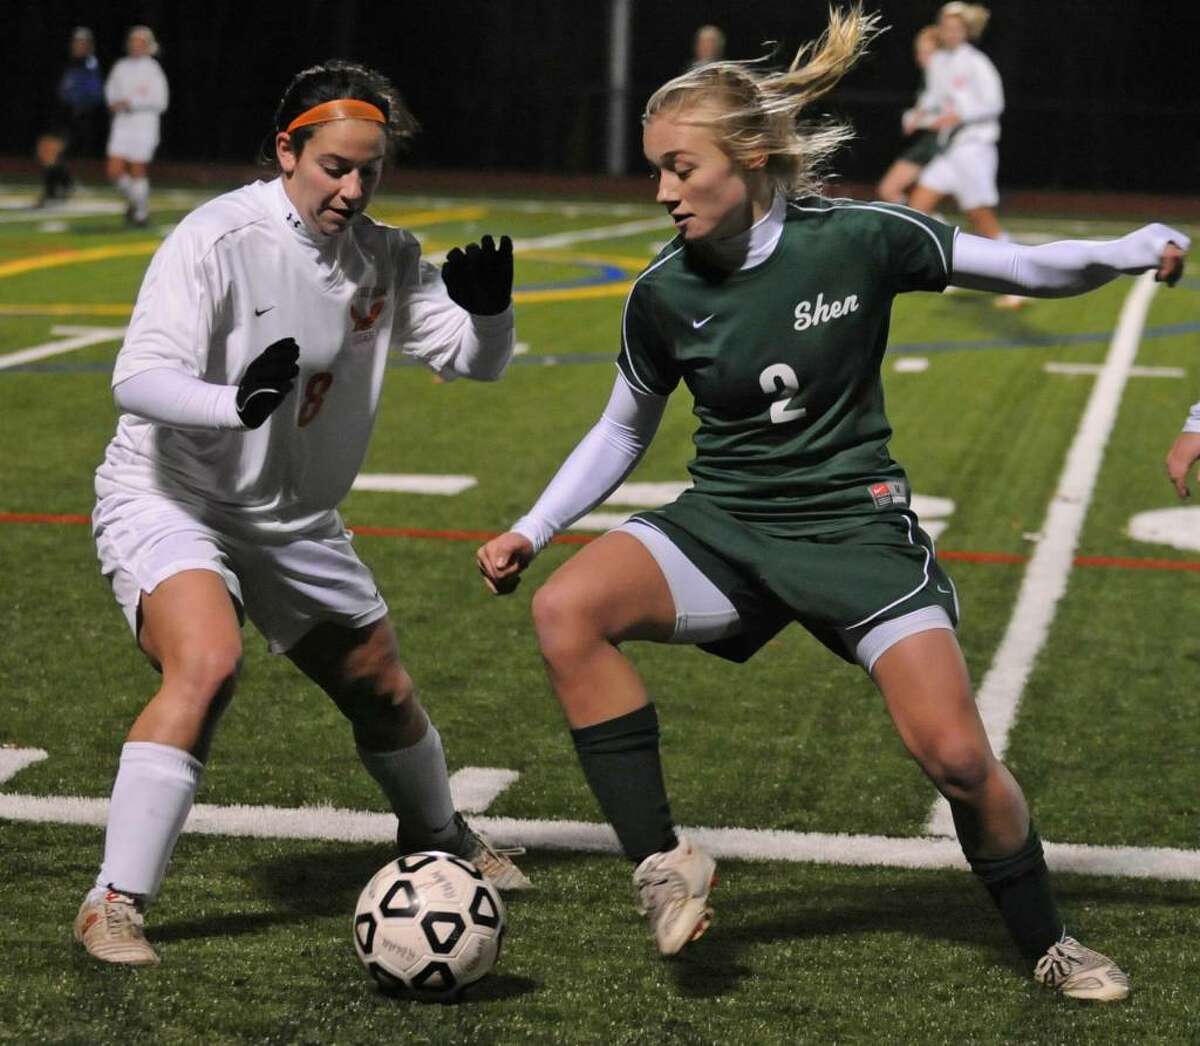 Michelle Primomo of Bethlehem, left, and Kristen Connors of Shenendehowa battle for the ball during the Class AA girls' soccer title game Wednesday, November 11, 2009, in Clifton Park. (Lori Van Buren / Times Union)